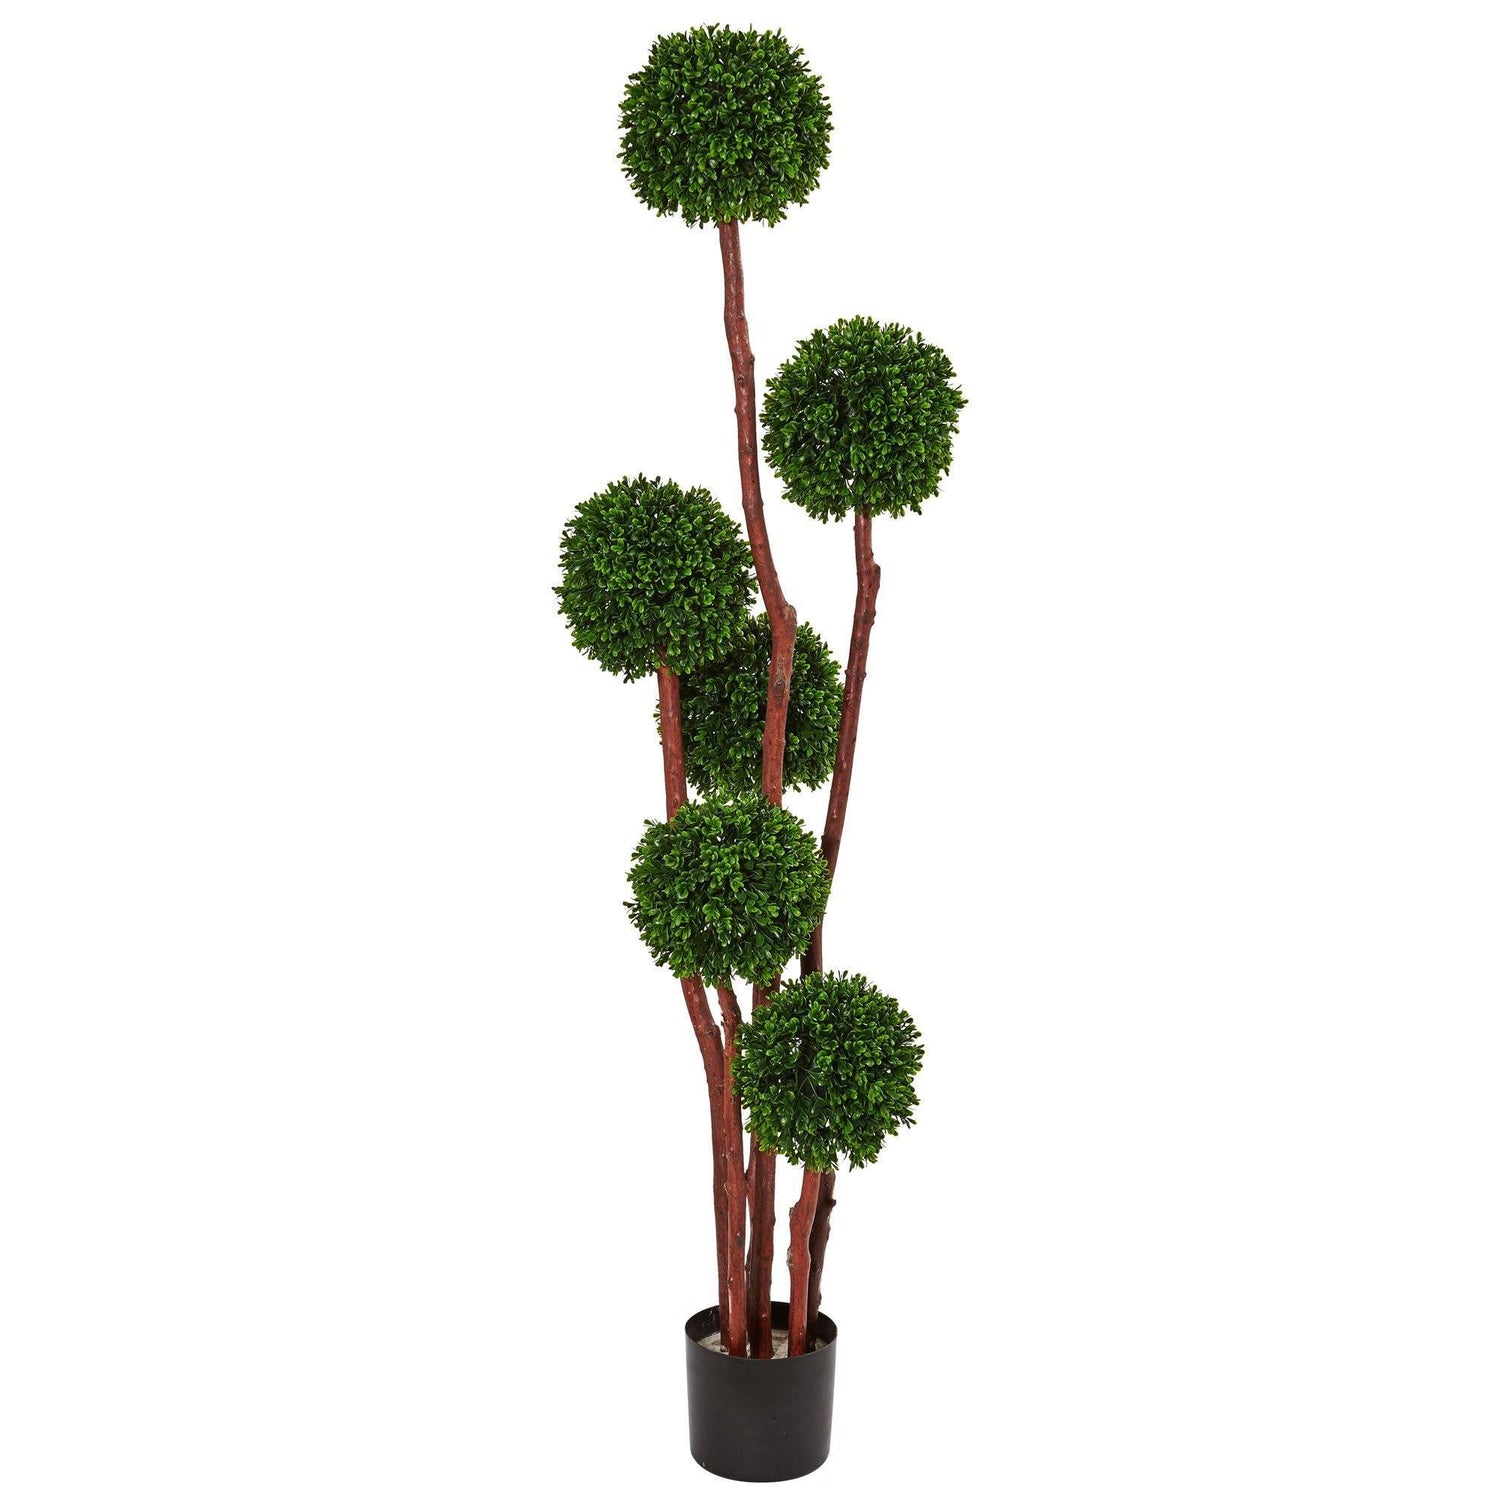 Artificial Boxwood Balls Uv Resistant Easy To Disassemble - Temu